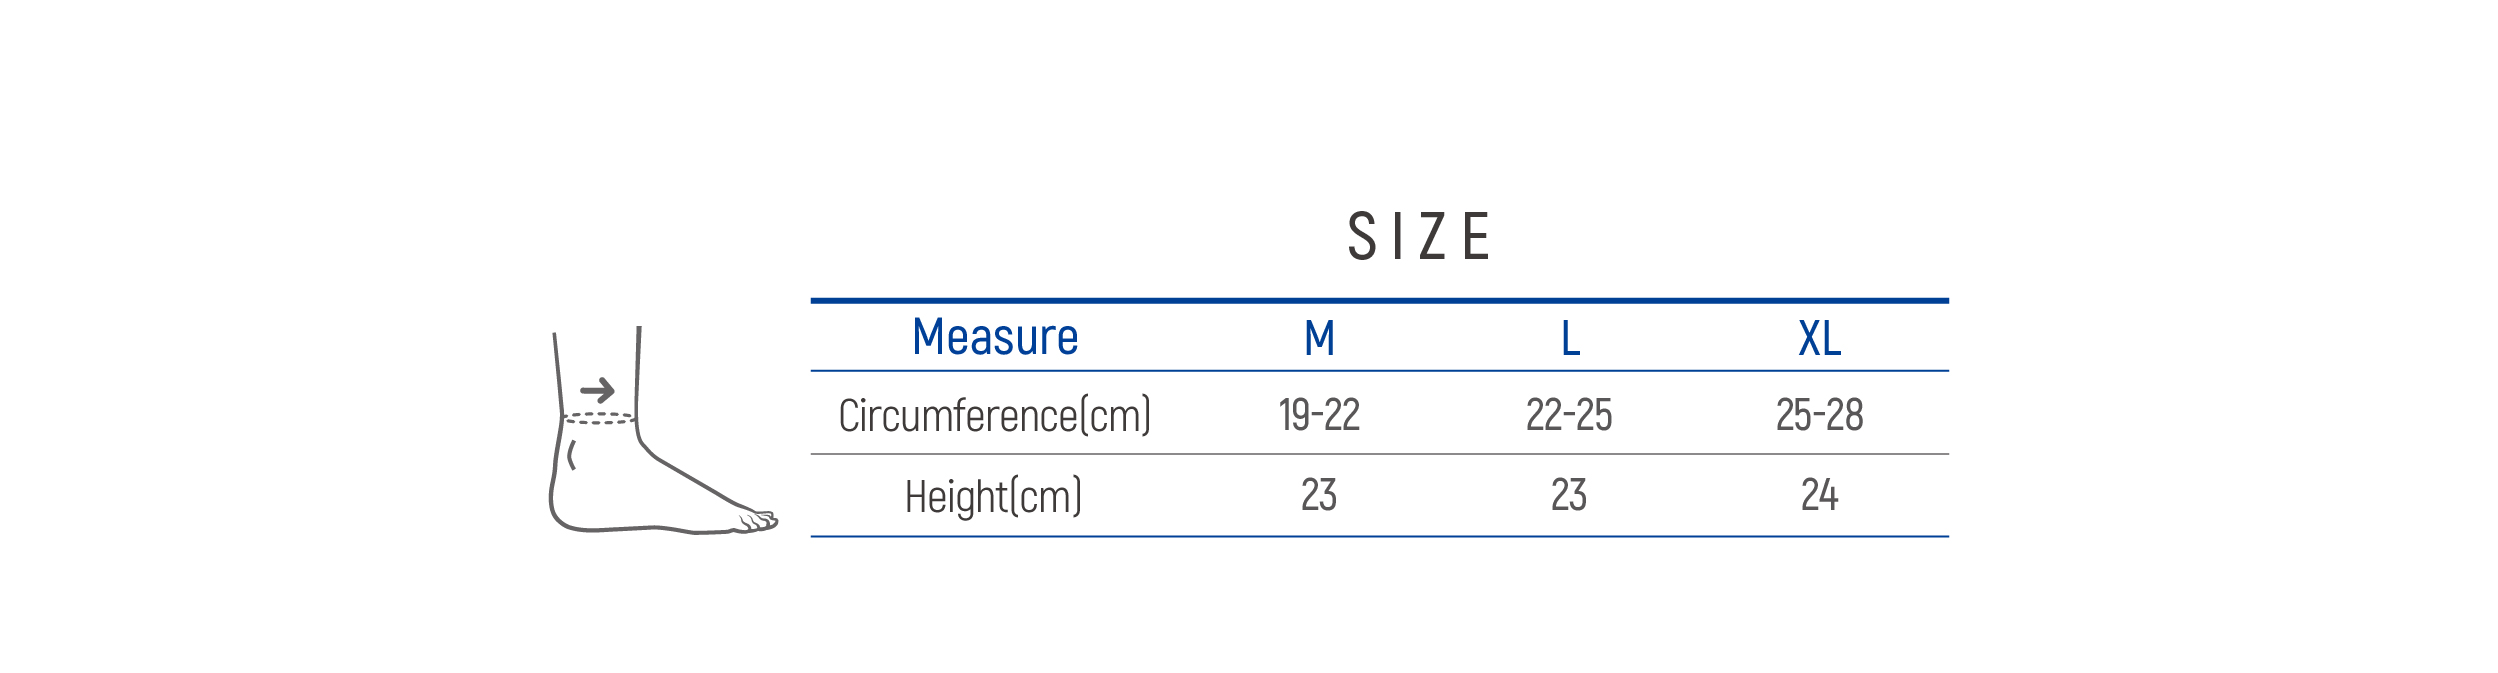 DR-A092 Size table image